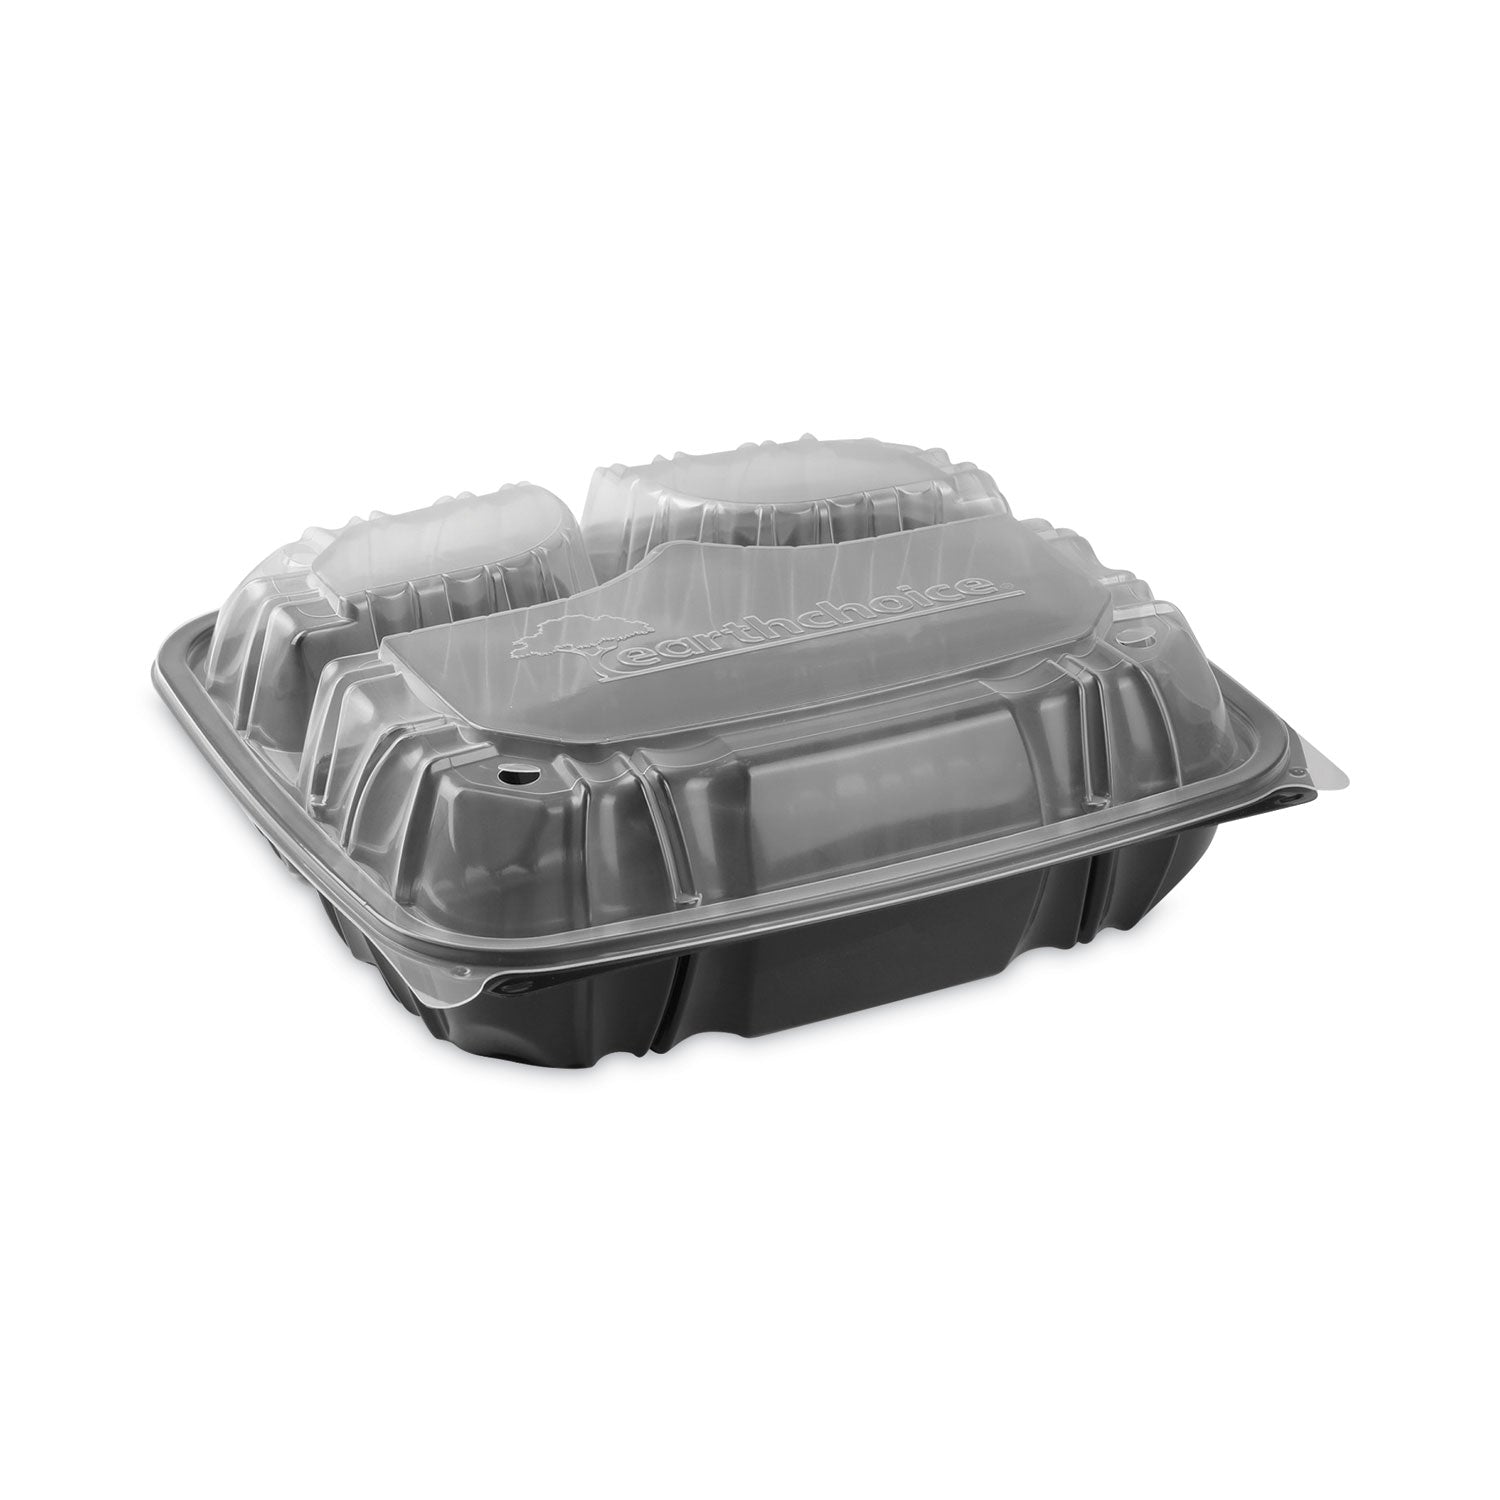 earthchoice-vented-dual-color-microwavable-hinged-lid-container-3-comp-base-lid-34-oz-105x95x3-blk-clr-plastic-132-ct_pctdc109330b000 - 1